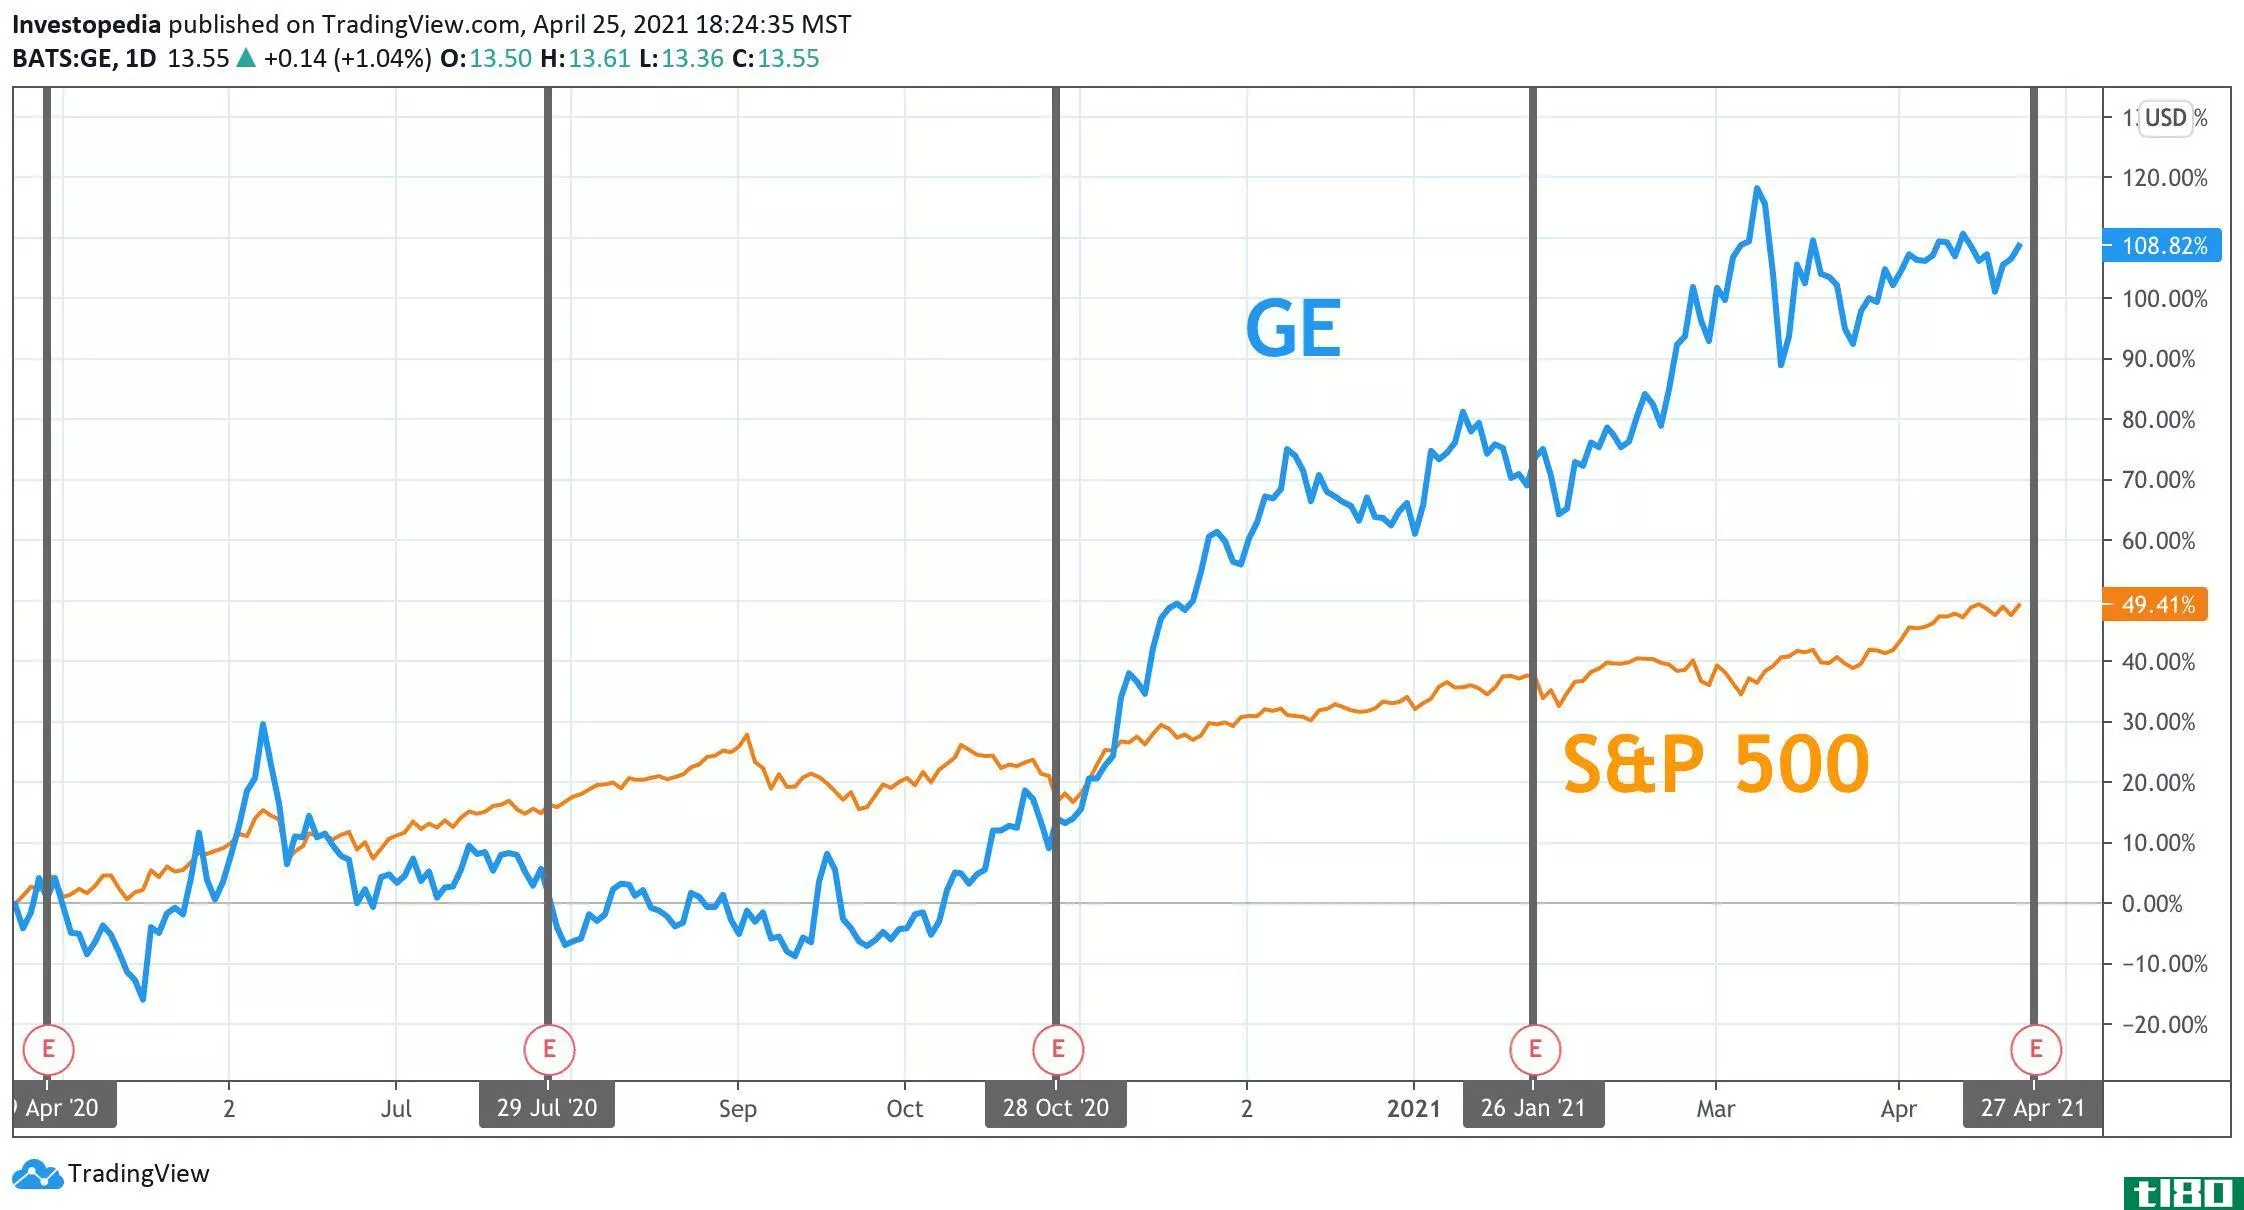 One Year Total Return for S&P 500 and GE